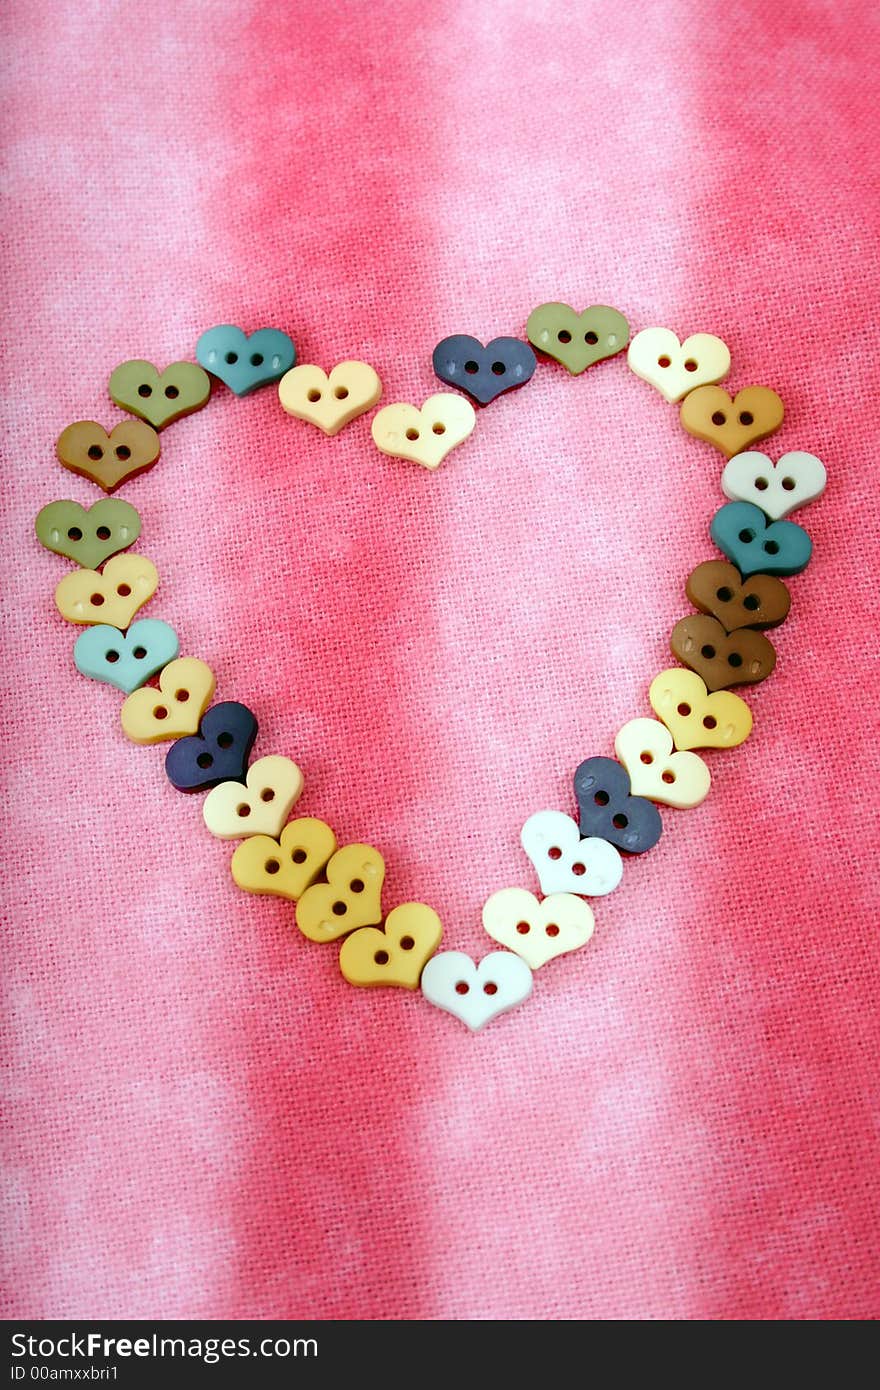 Buttons for Valentine's Day. It seems like around Valentine's Day everything is shaped like hearts. Buttons for Valentine's Day. It seems like around Valentine's Day everything is shaped like hearts.